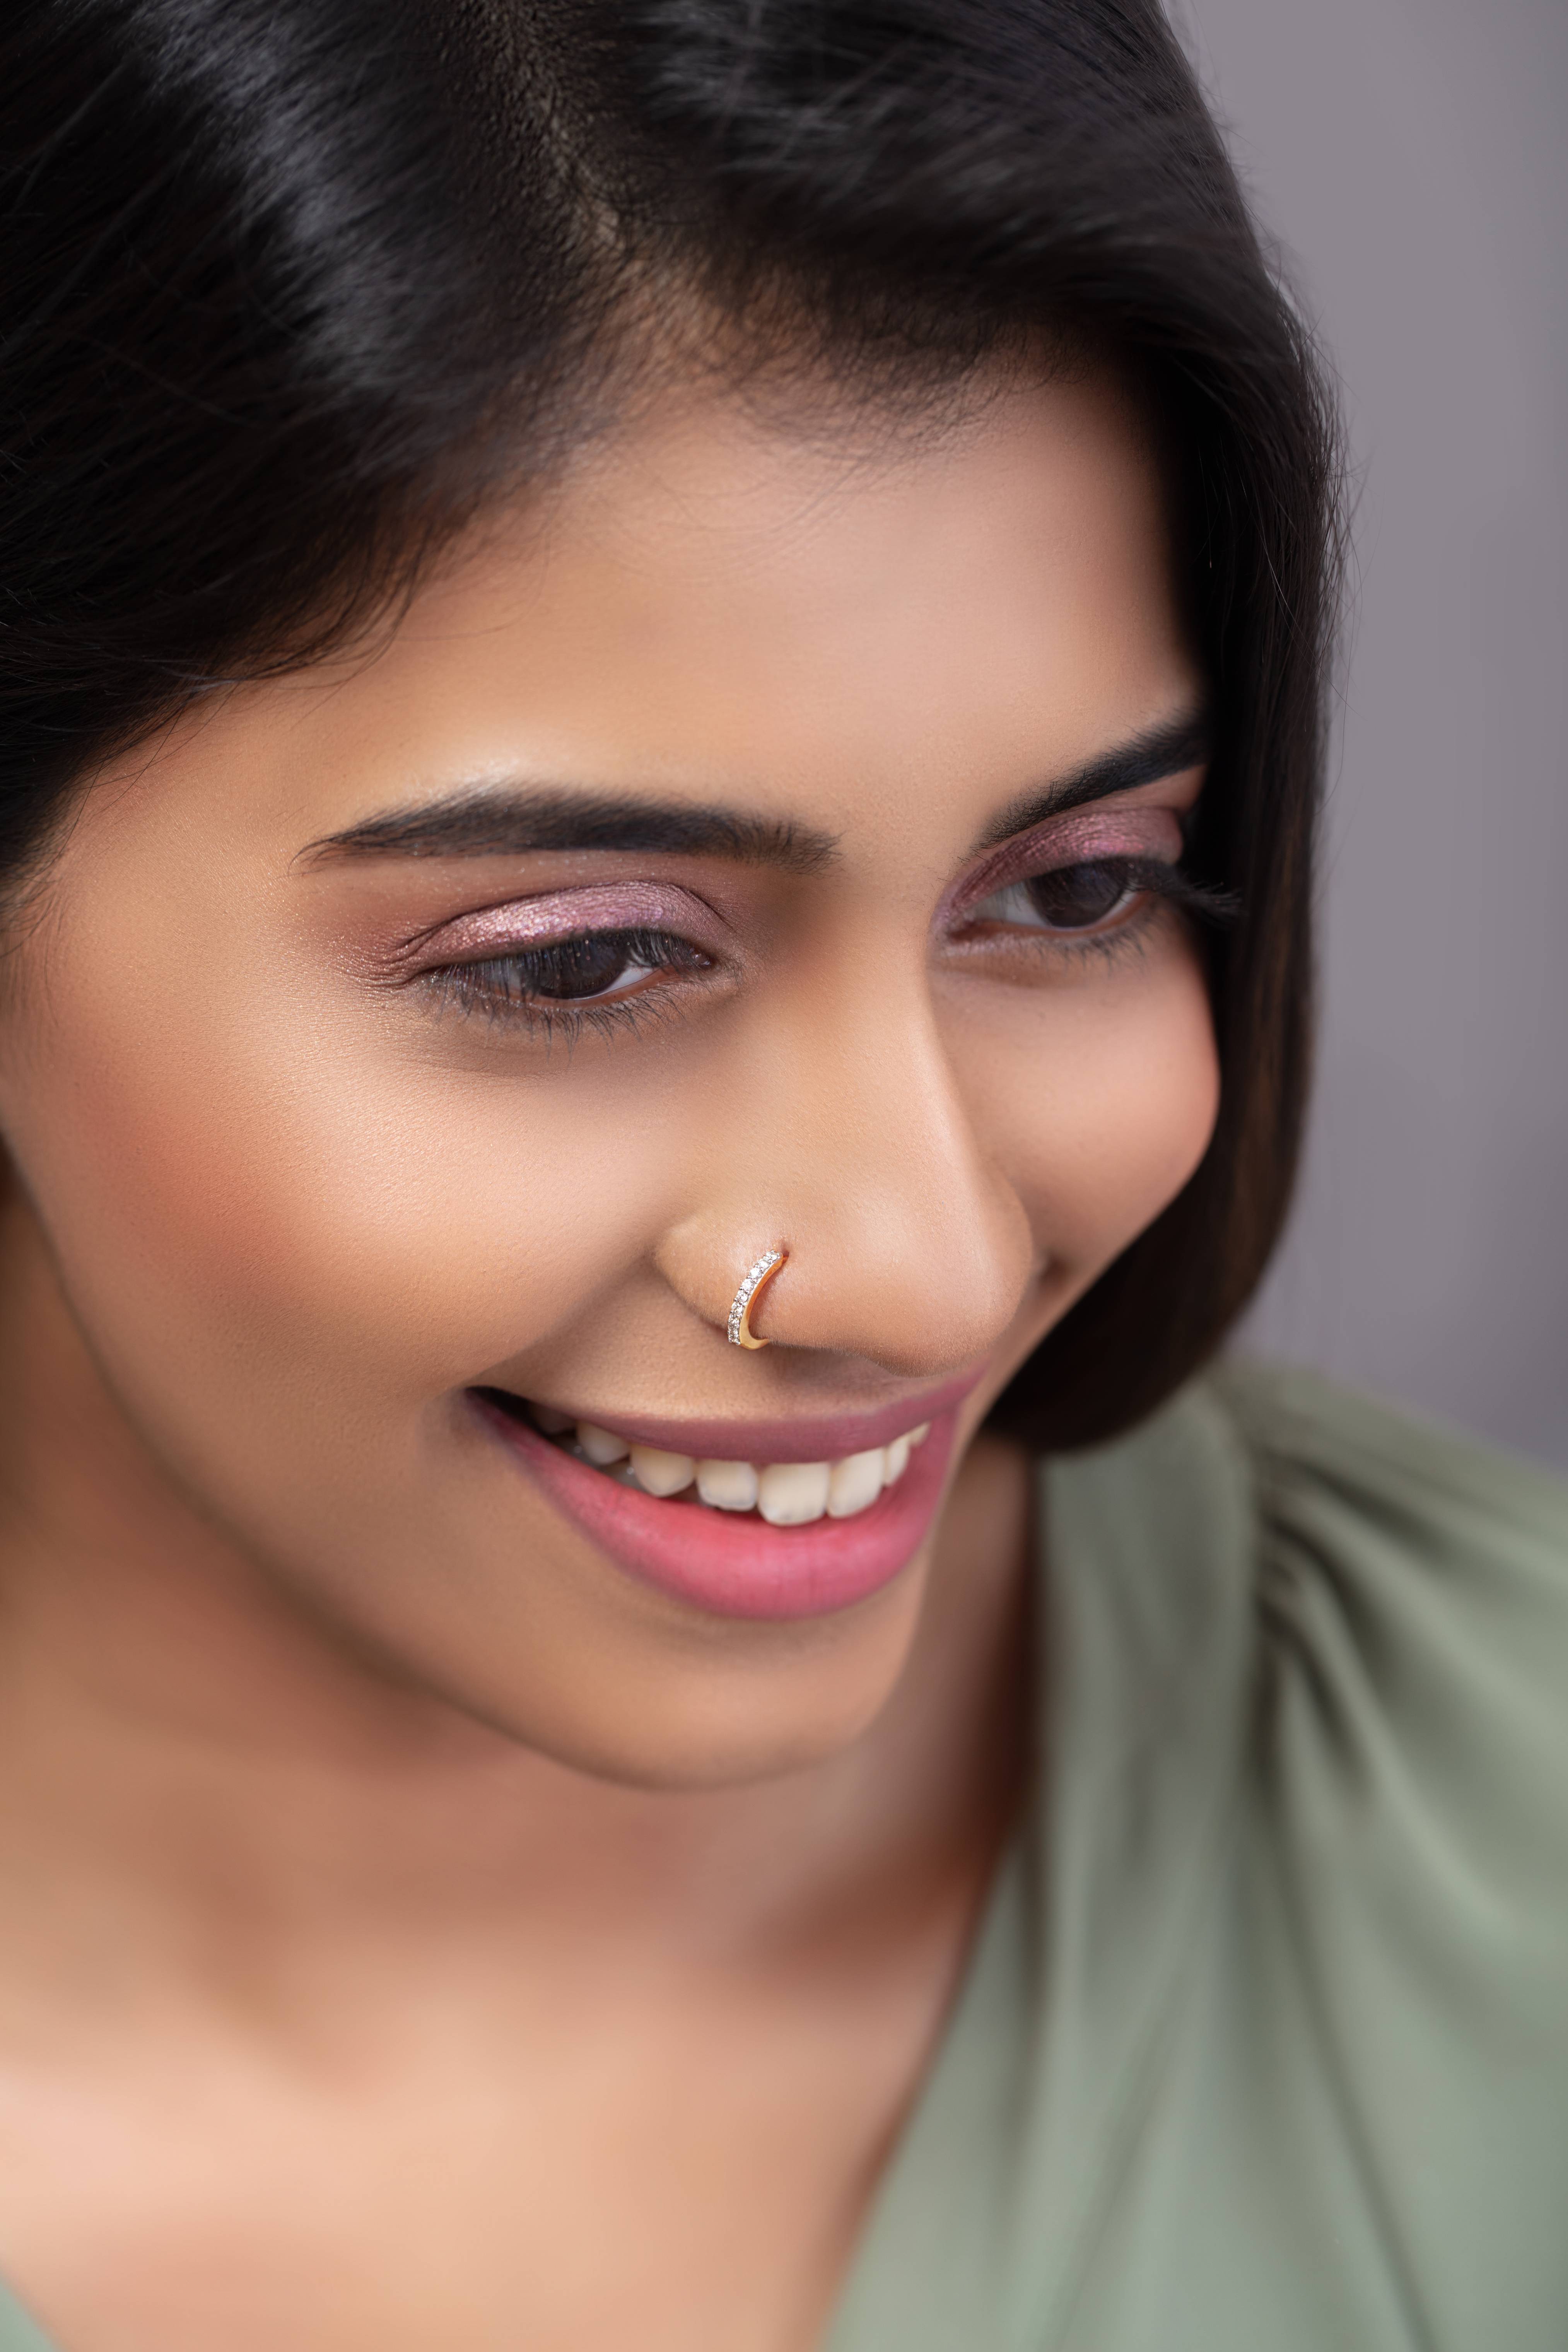 Nose Piercing Newbie? Which Nose Piercing Should I Get?